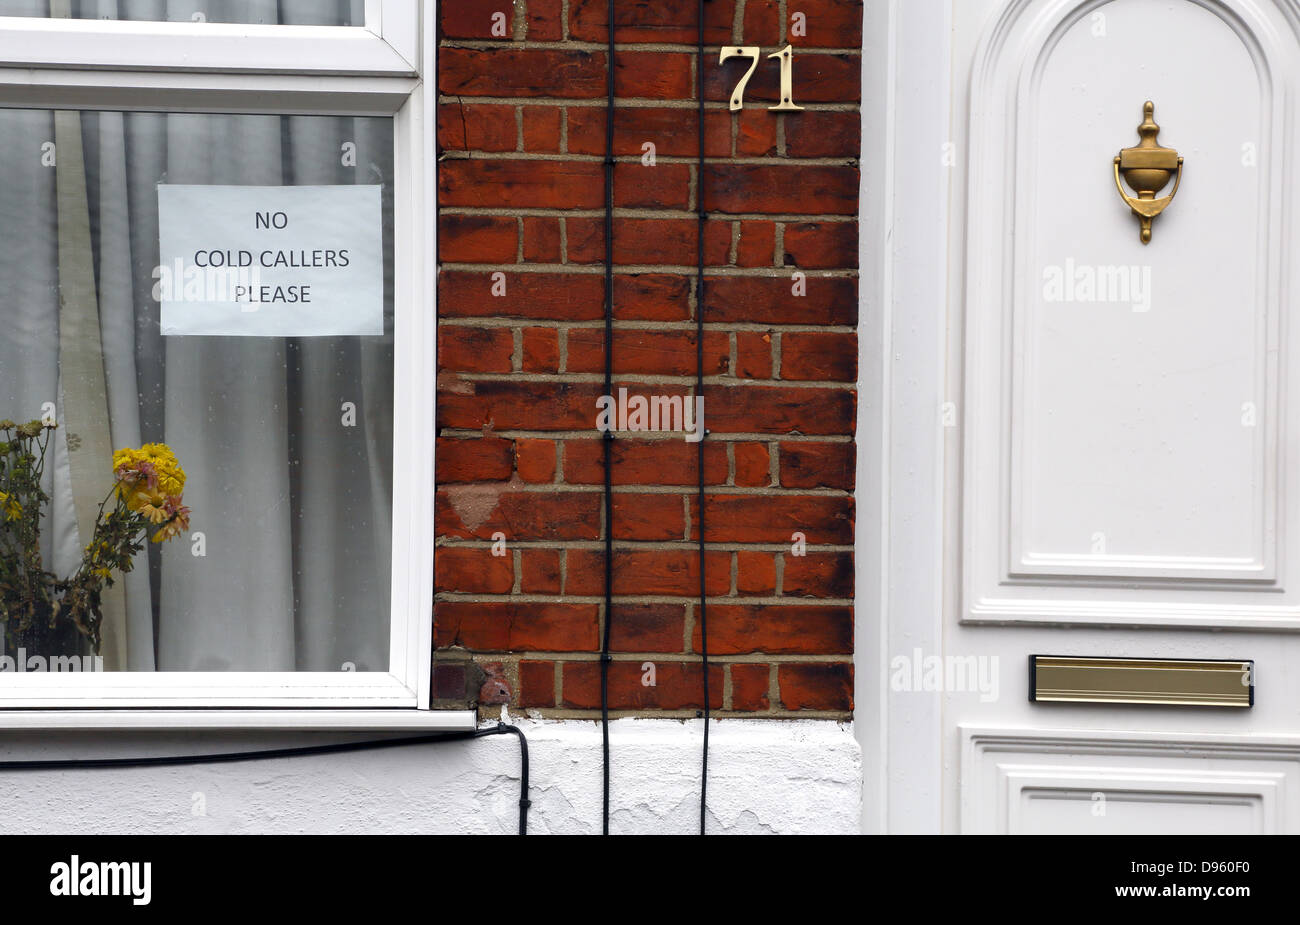 No cold callers sign on a window of a house. Stock Photo